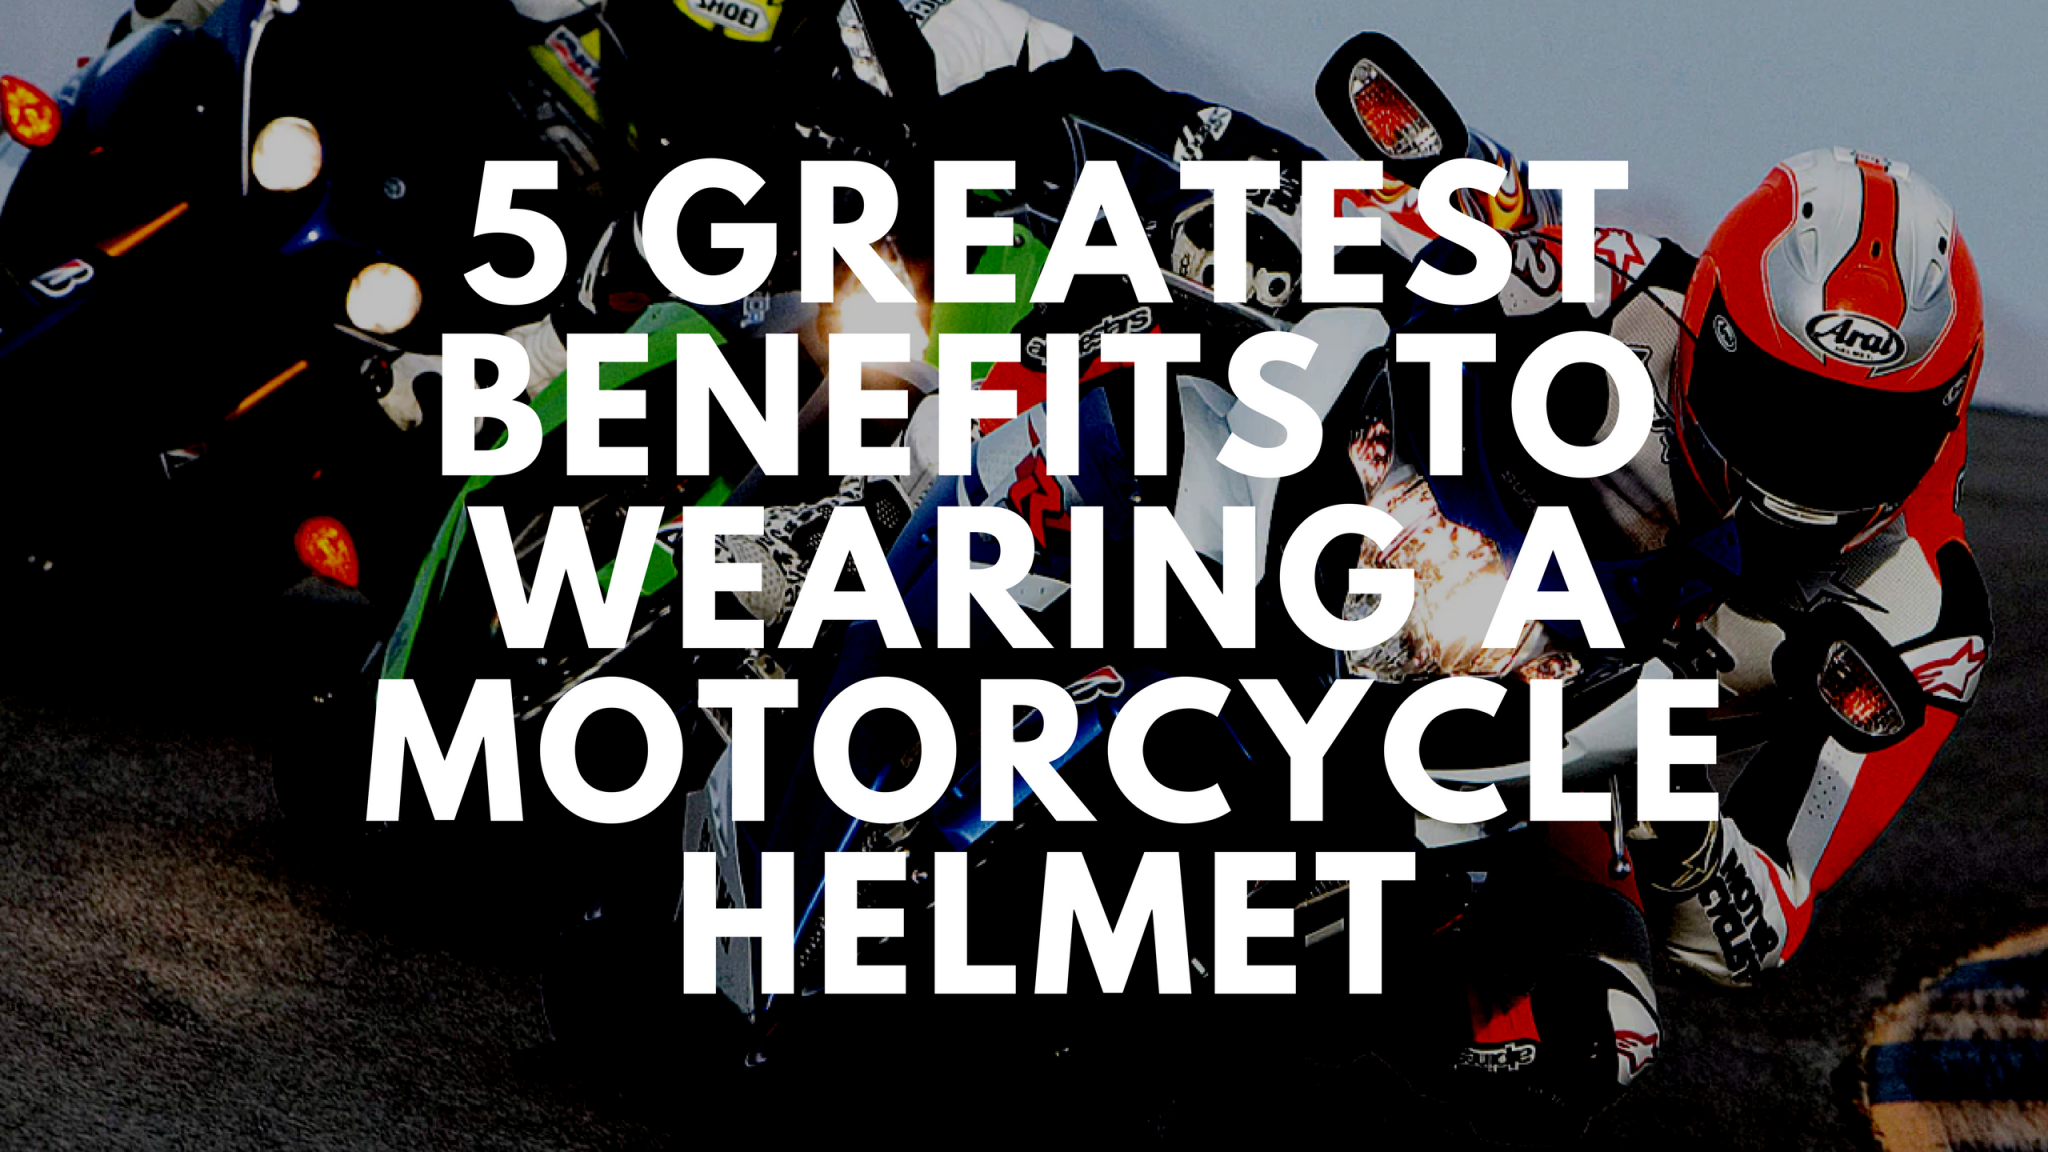 5 Greatest Benefits to Wearing a Motorcycle Helmet